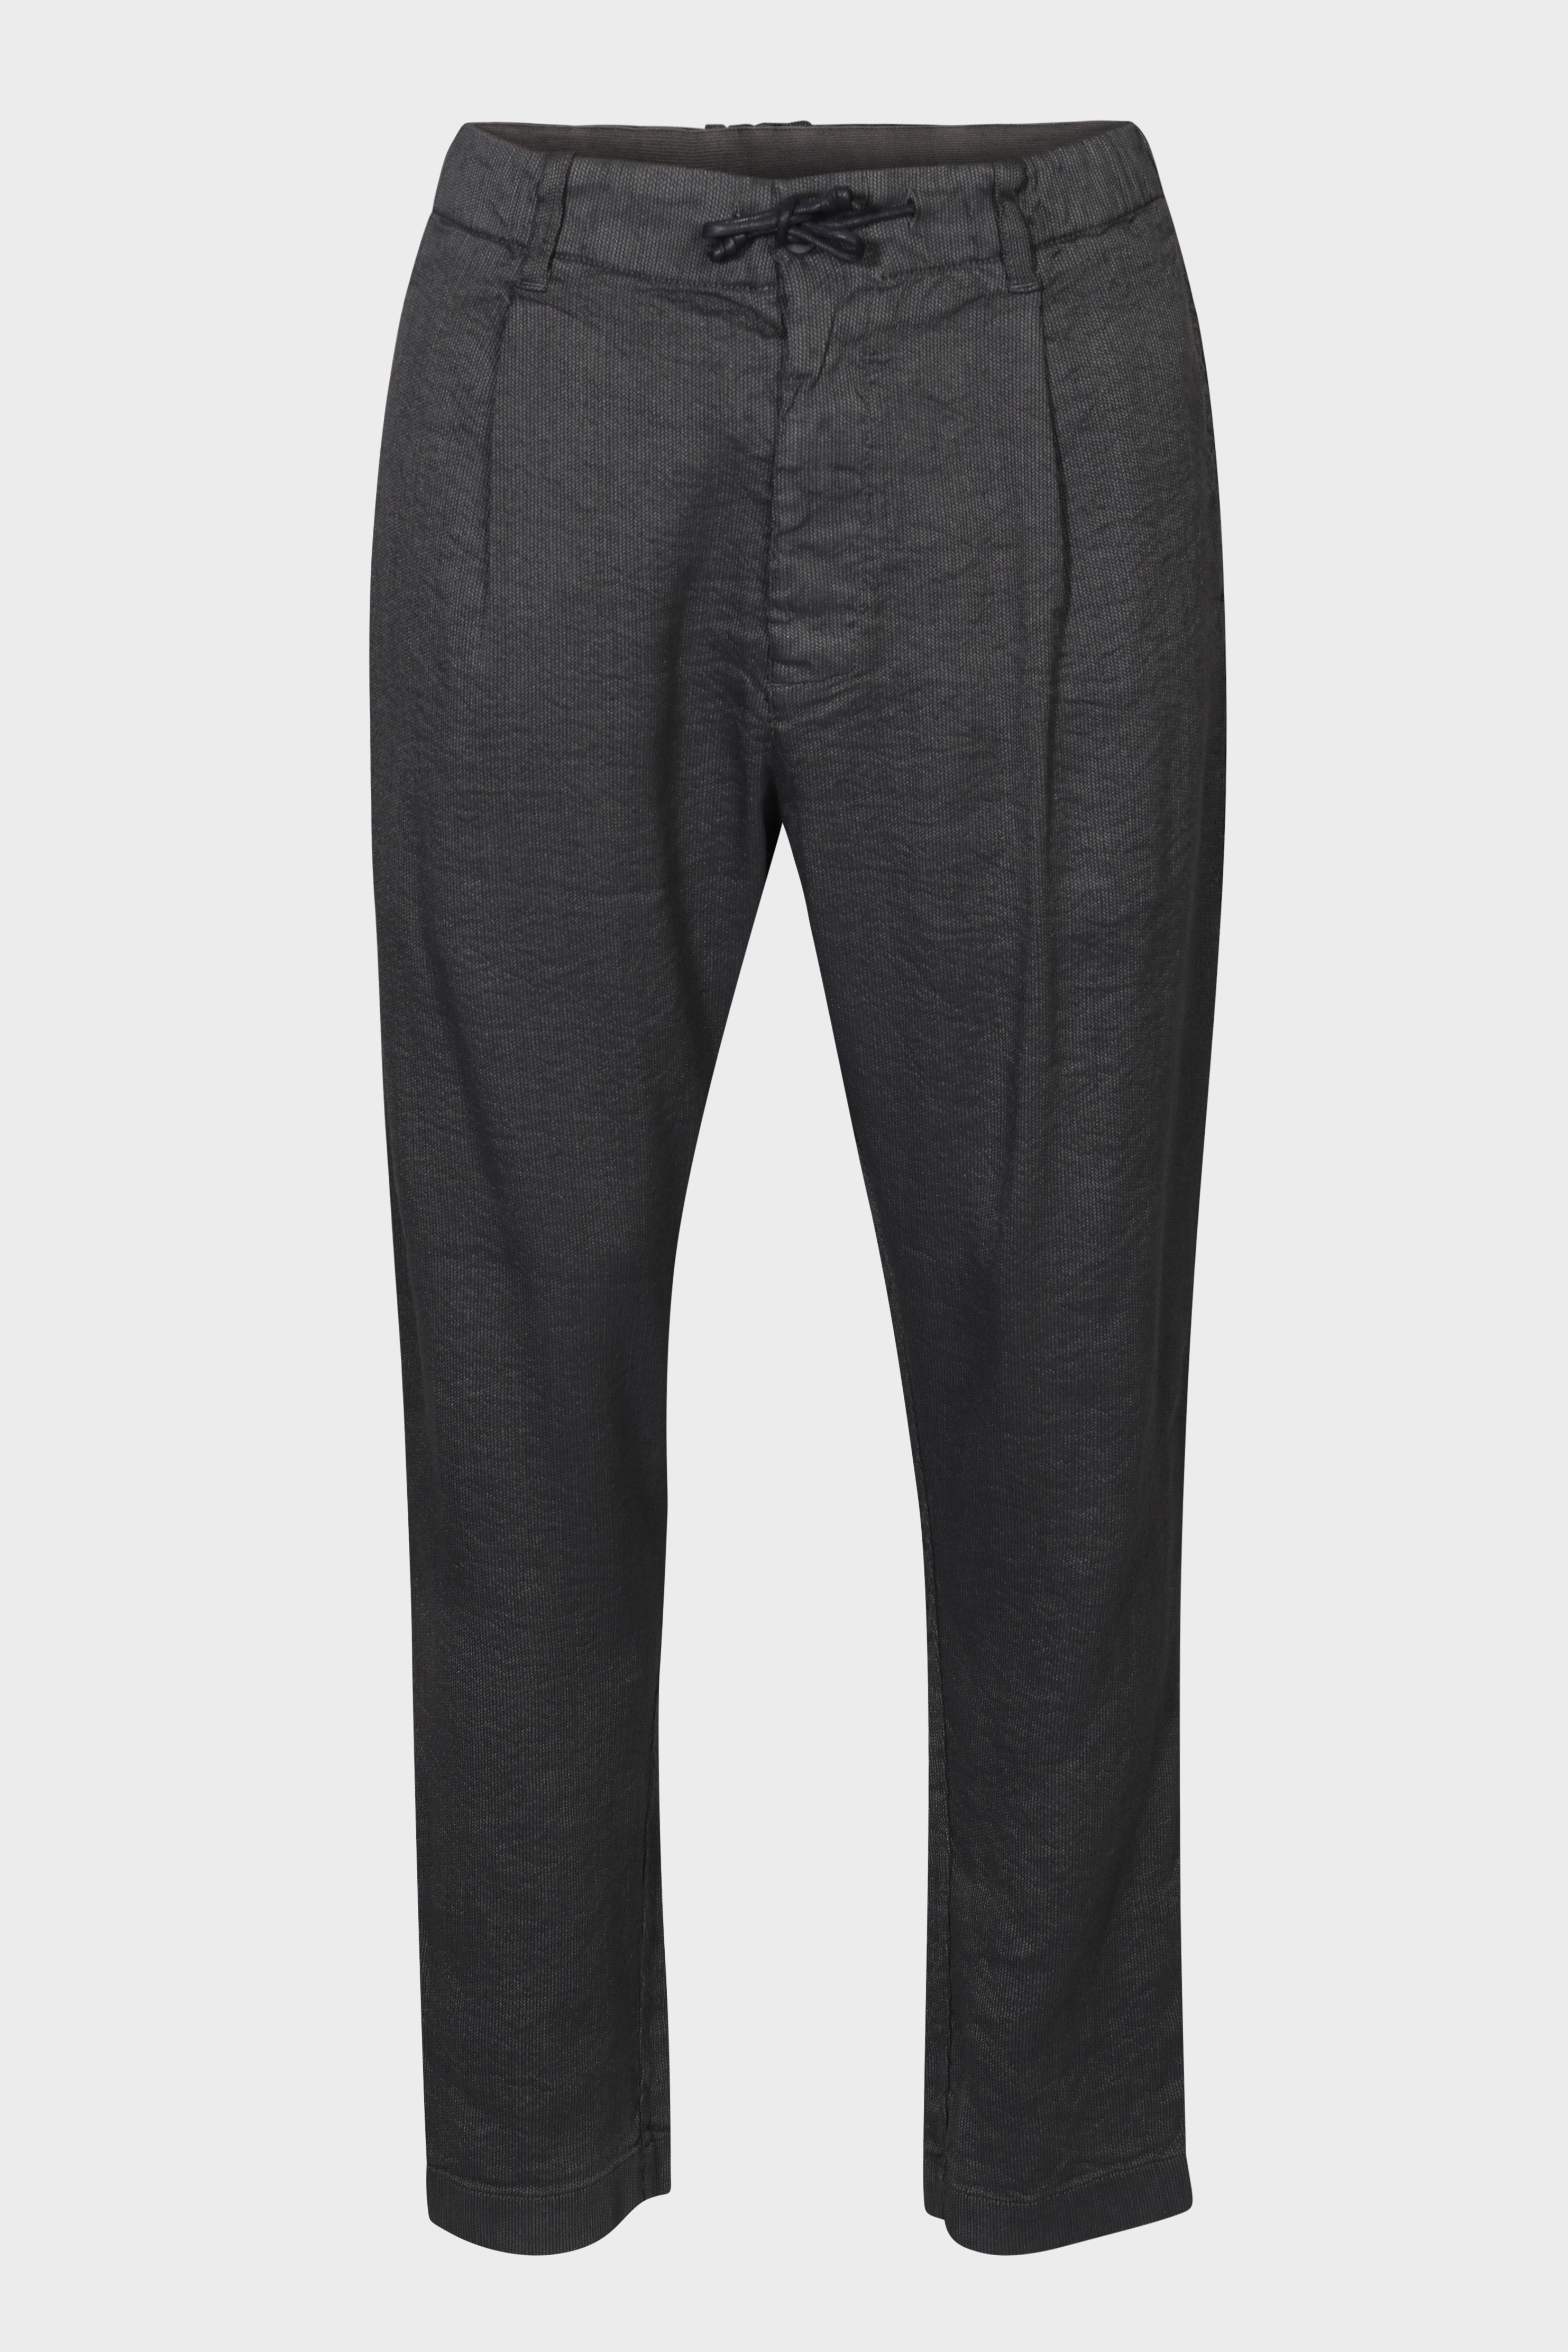 TRANSIT UOMO Structure Stretch Pant in Charcoal XL